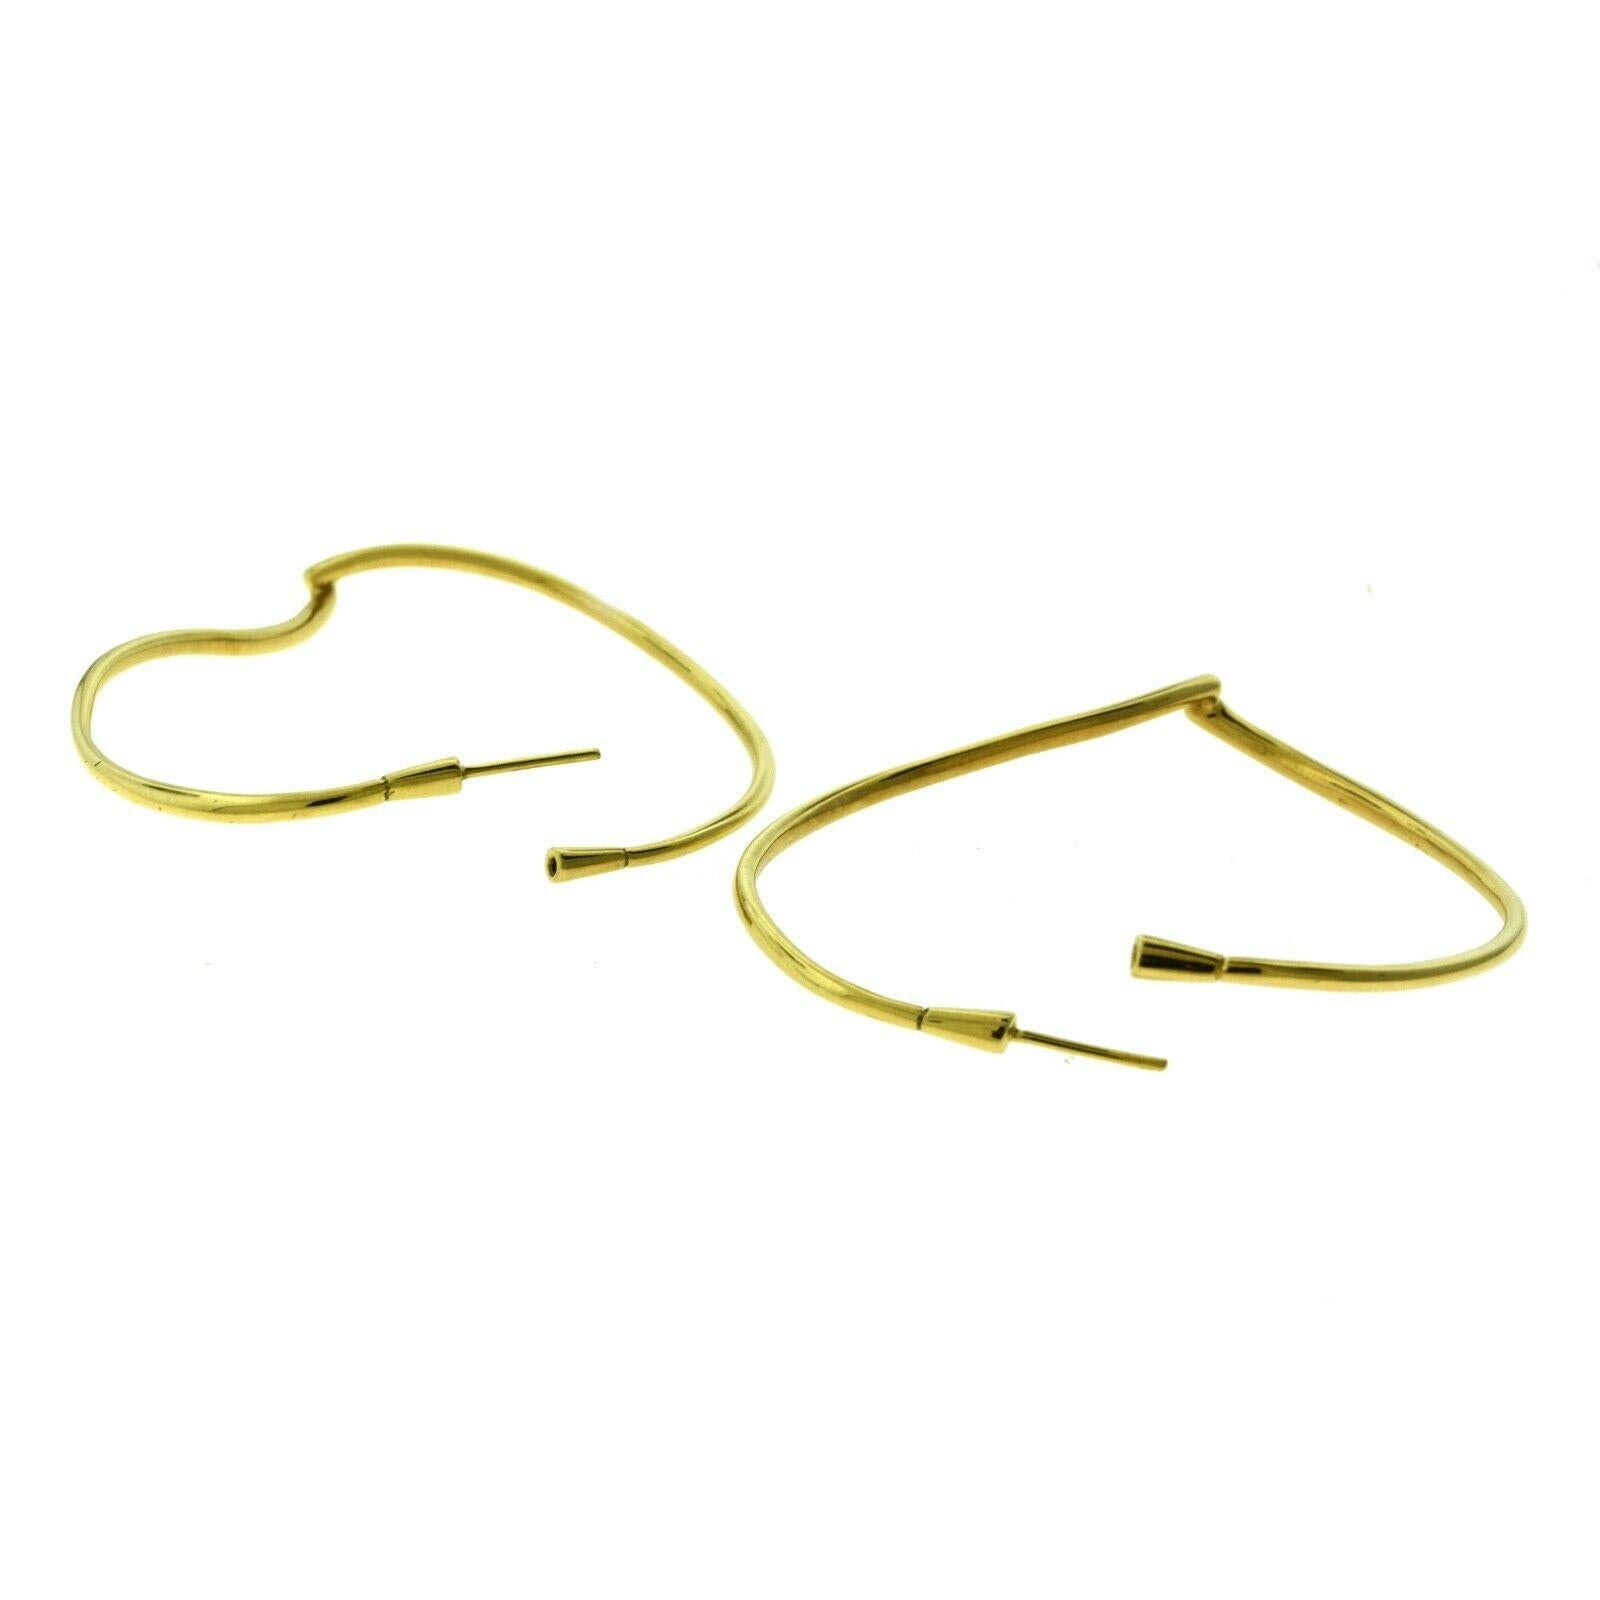 Brilliance Jewels, Miami
Questions? Call Us Anytime!
786,482,8100

Style: Large Hoop Earrings

Metal: Yellow Gold 

Metal Purity: 18k ​​

Total Item Weight (grams):  16.2

Earring Dimensions: 2 